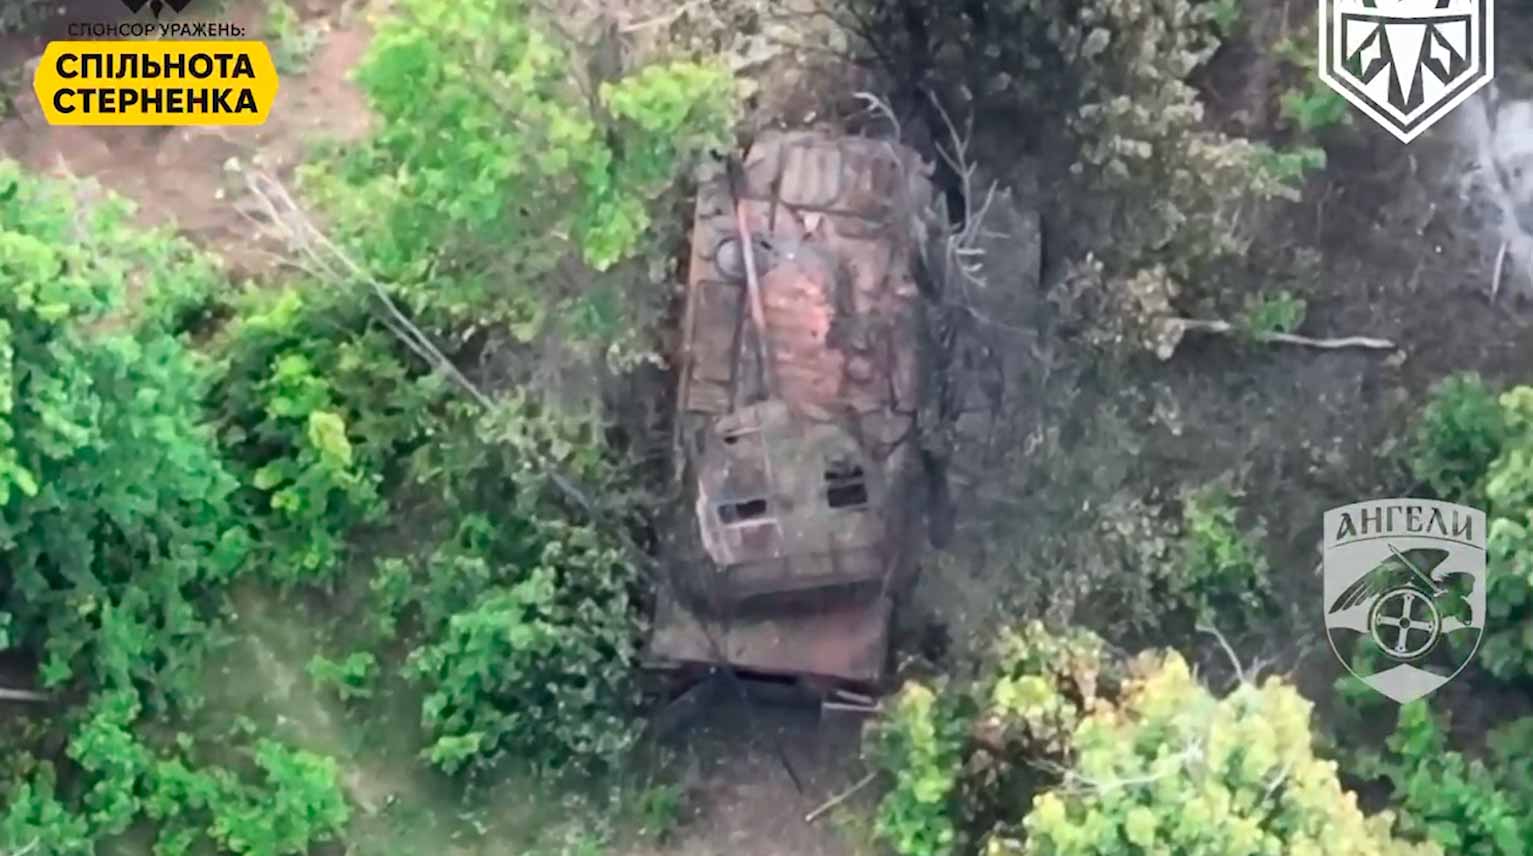 Video shows the destruction of a rare 2S34 Khosta self-propelled gun in the Donetsk region. Video and photos: t.me/adamtactic